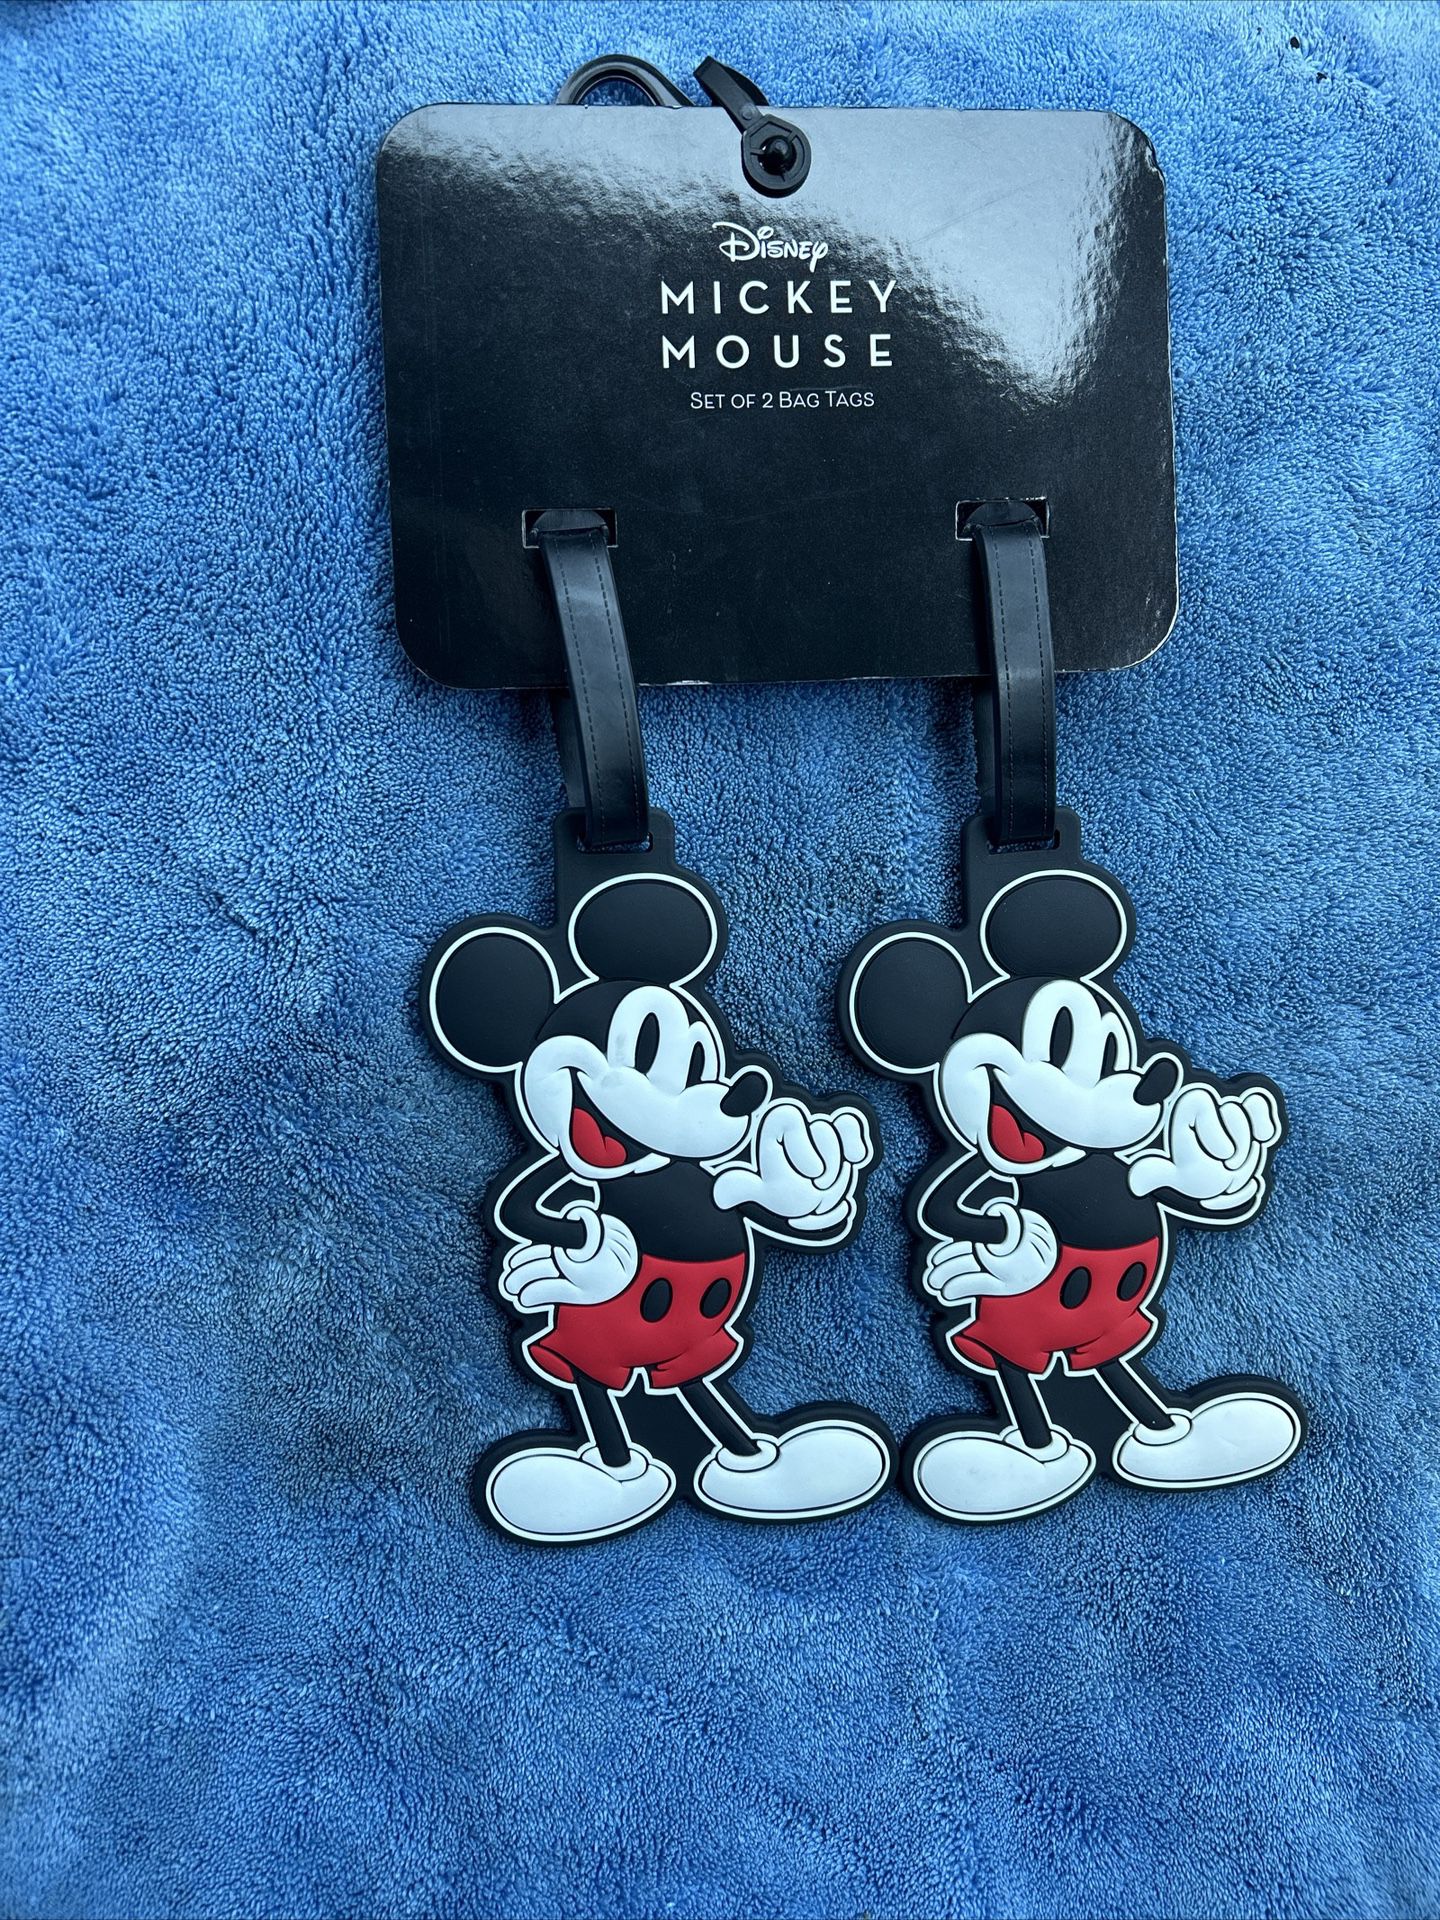 Disney Mickey Mouse Luggage Travel Bag Tags Set of Two Mickey Mouse Classic NEW